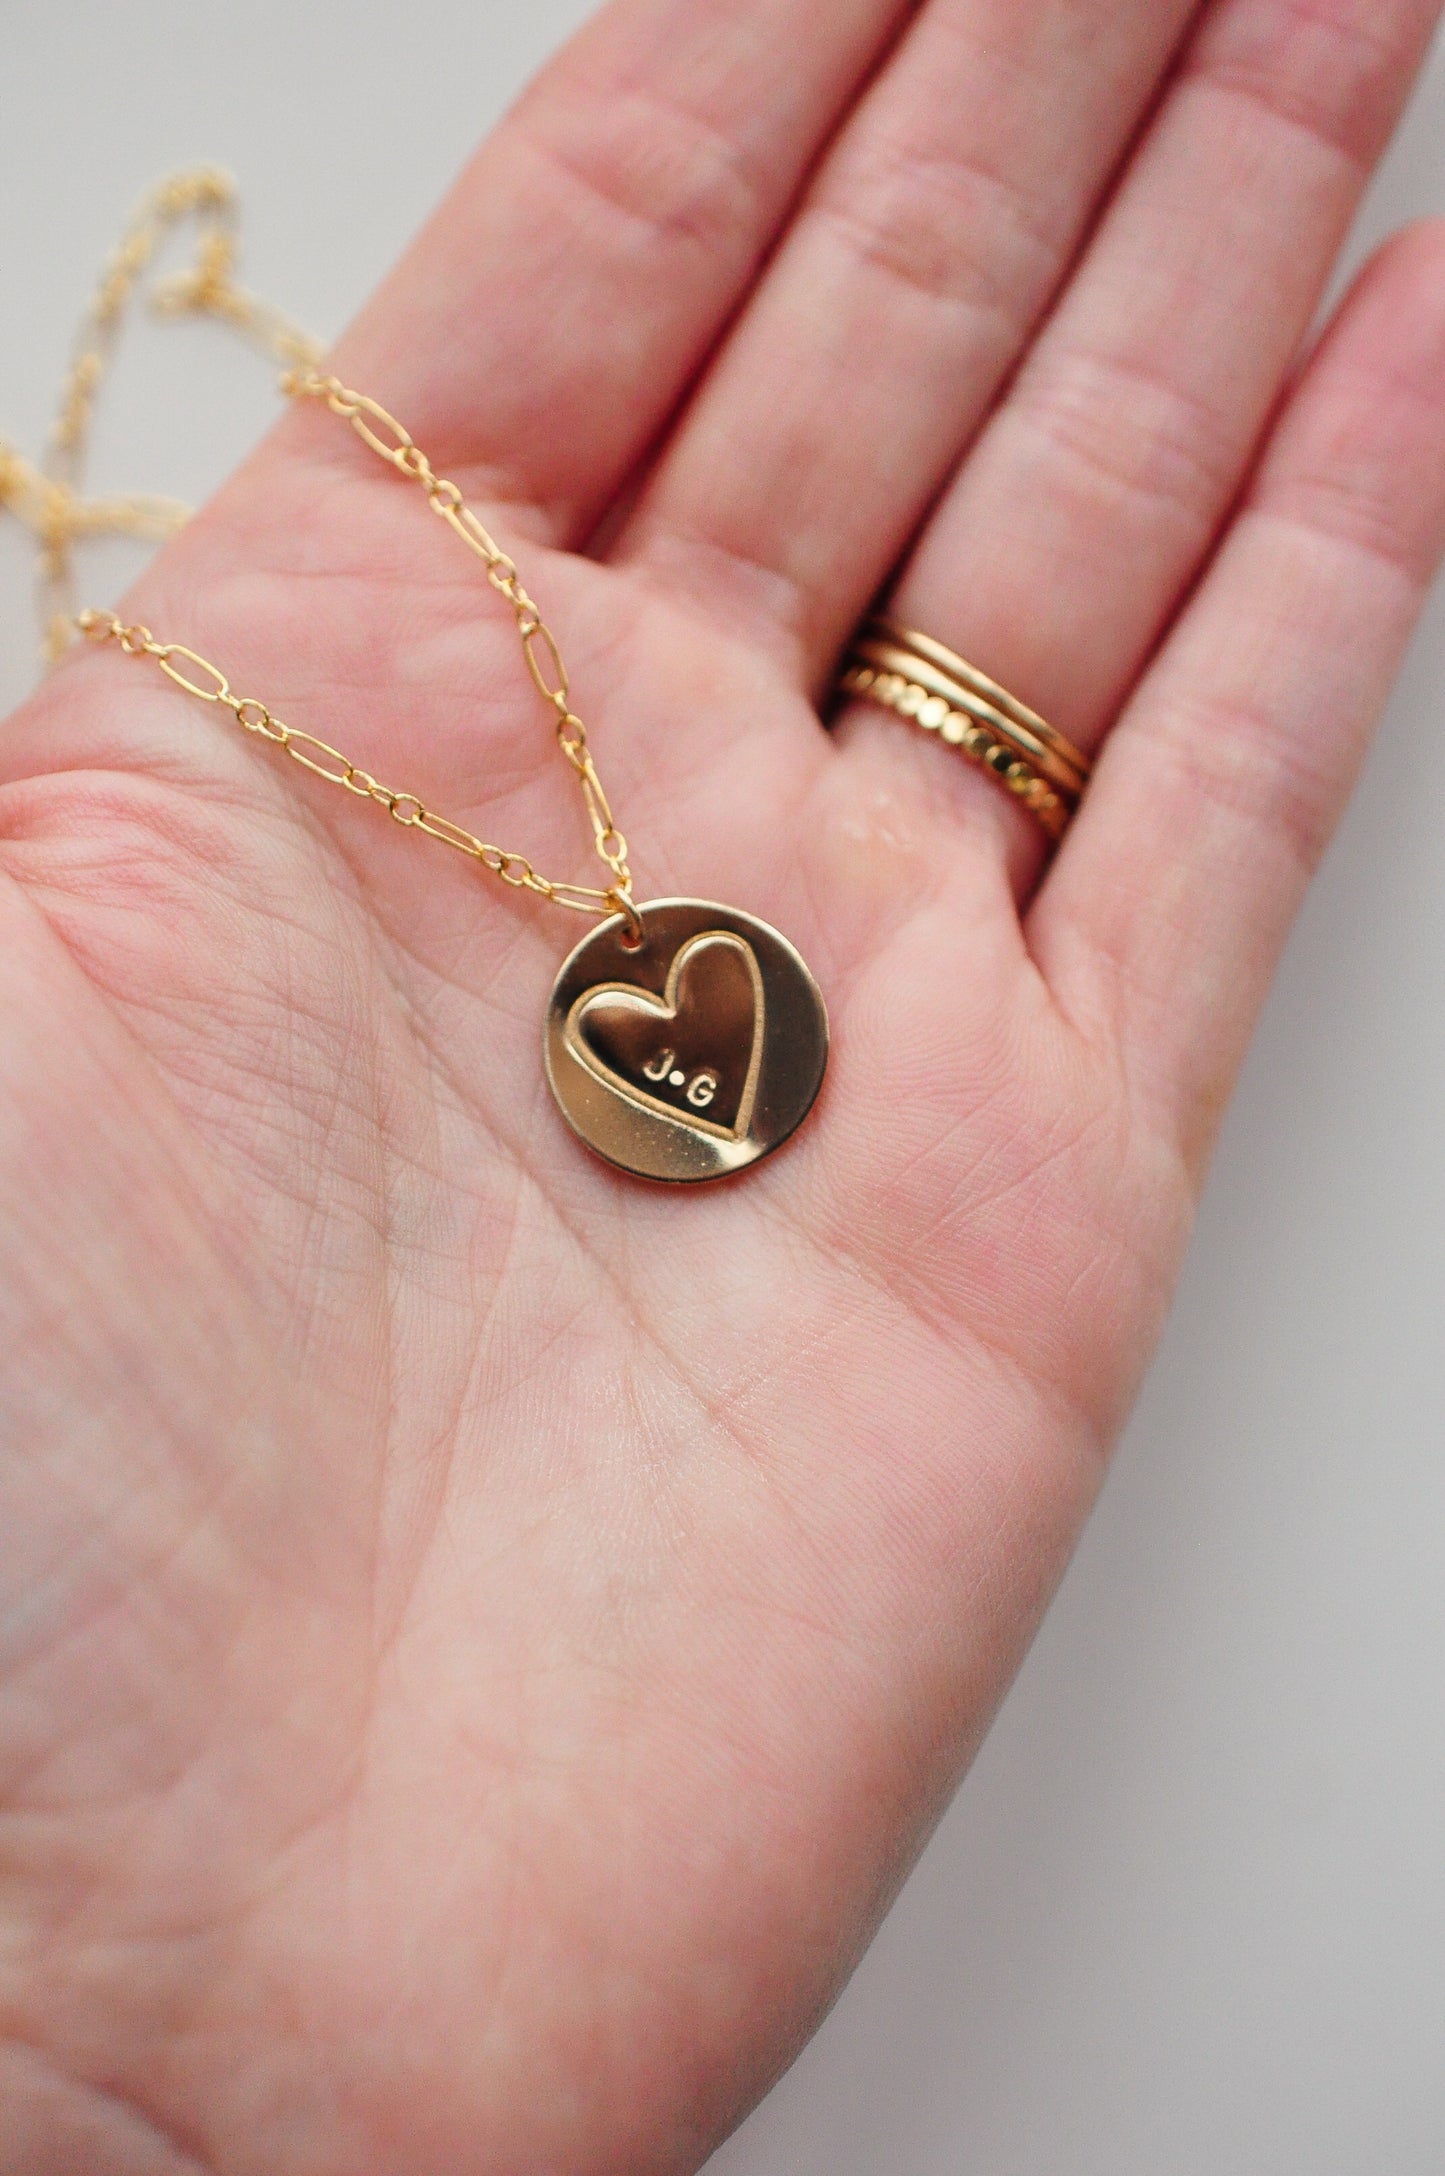 Stamped Heart & Initial Necklace